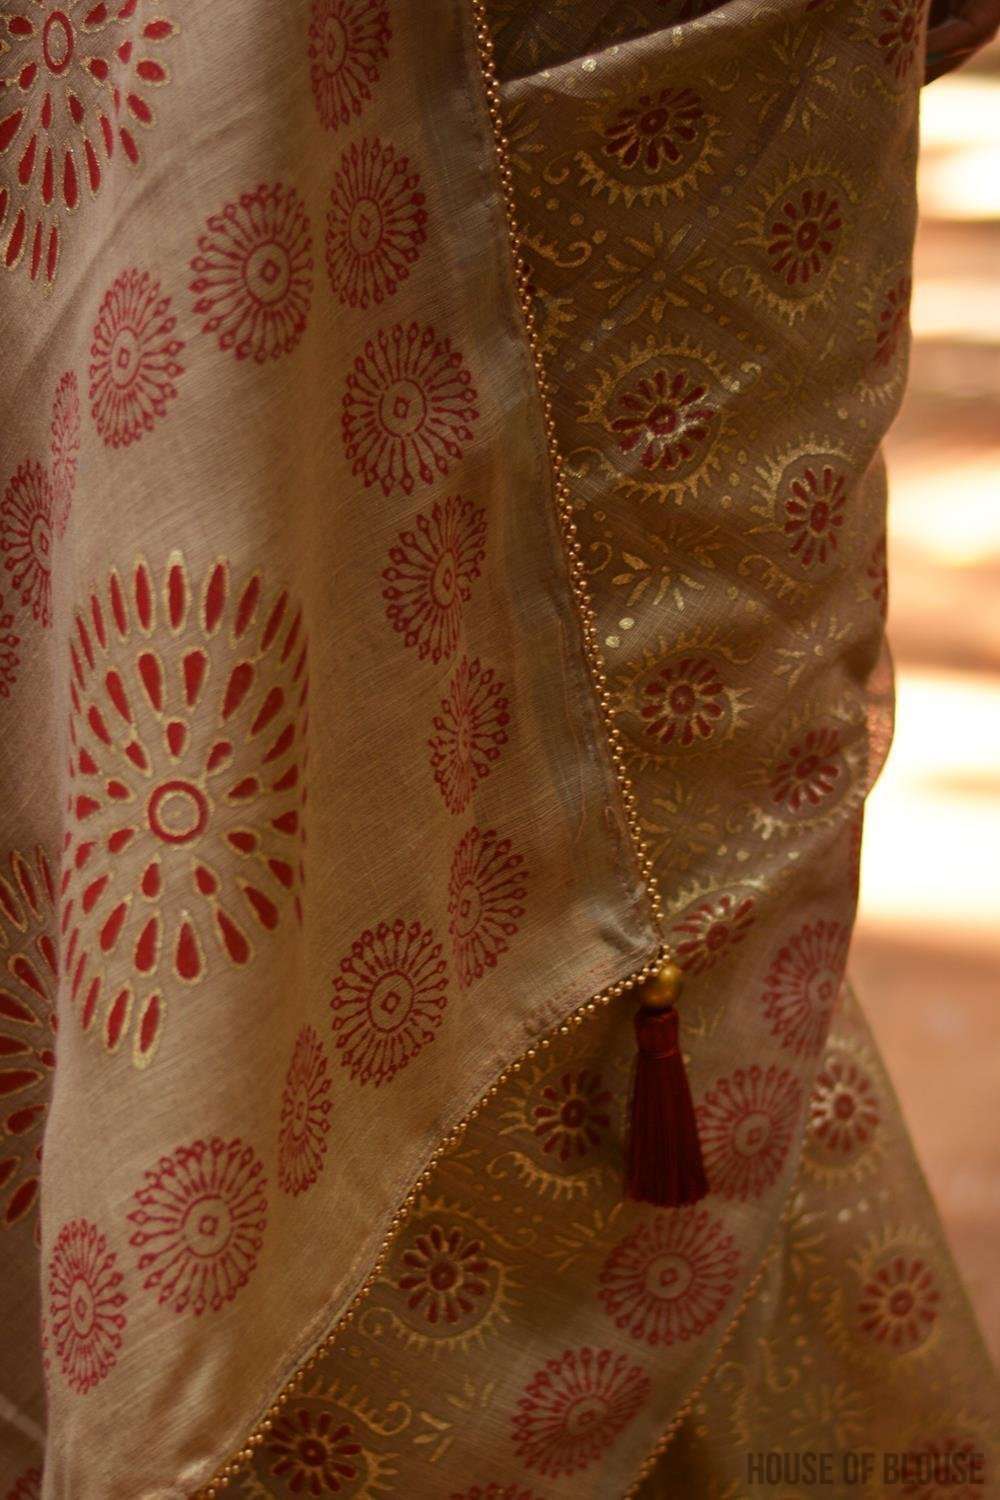 Beige soft linen saree with maroon and gold block print, tissue edging and gold bead edging - House of Blouse